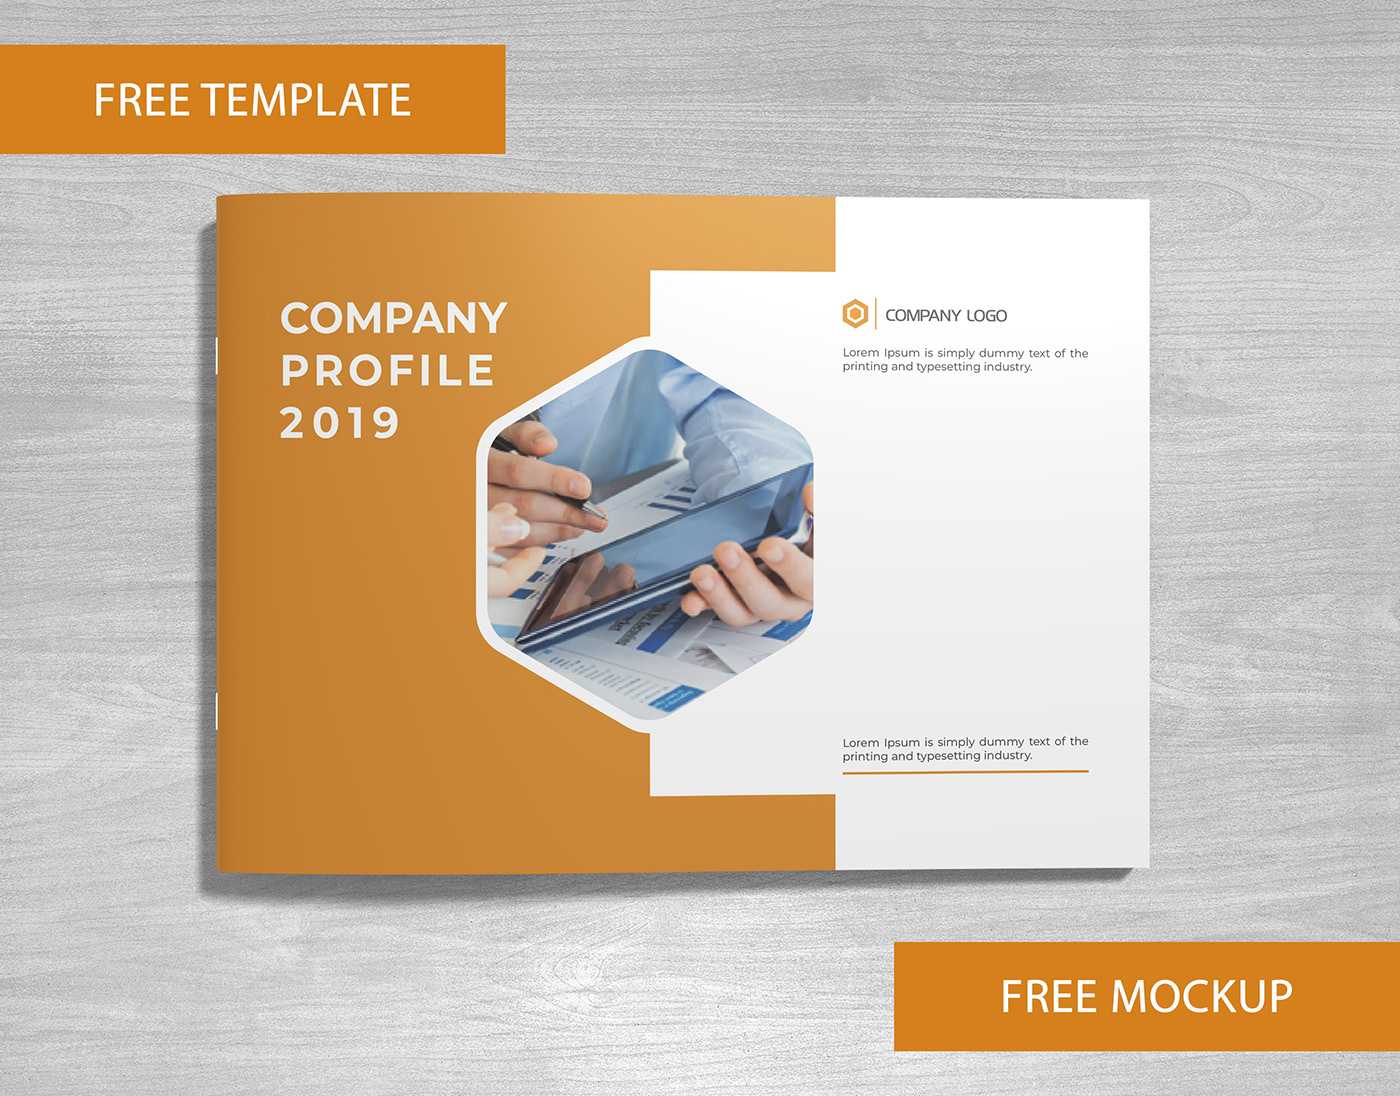 Company Profile Free Template And Mockup Download On Behance Pertaining To Creative Brochure Templates Free Download